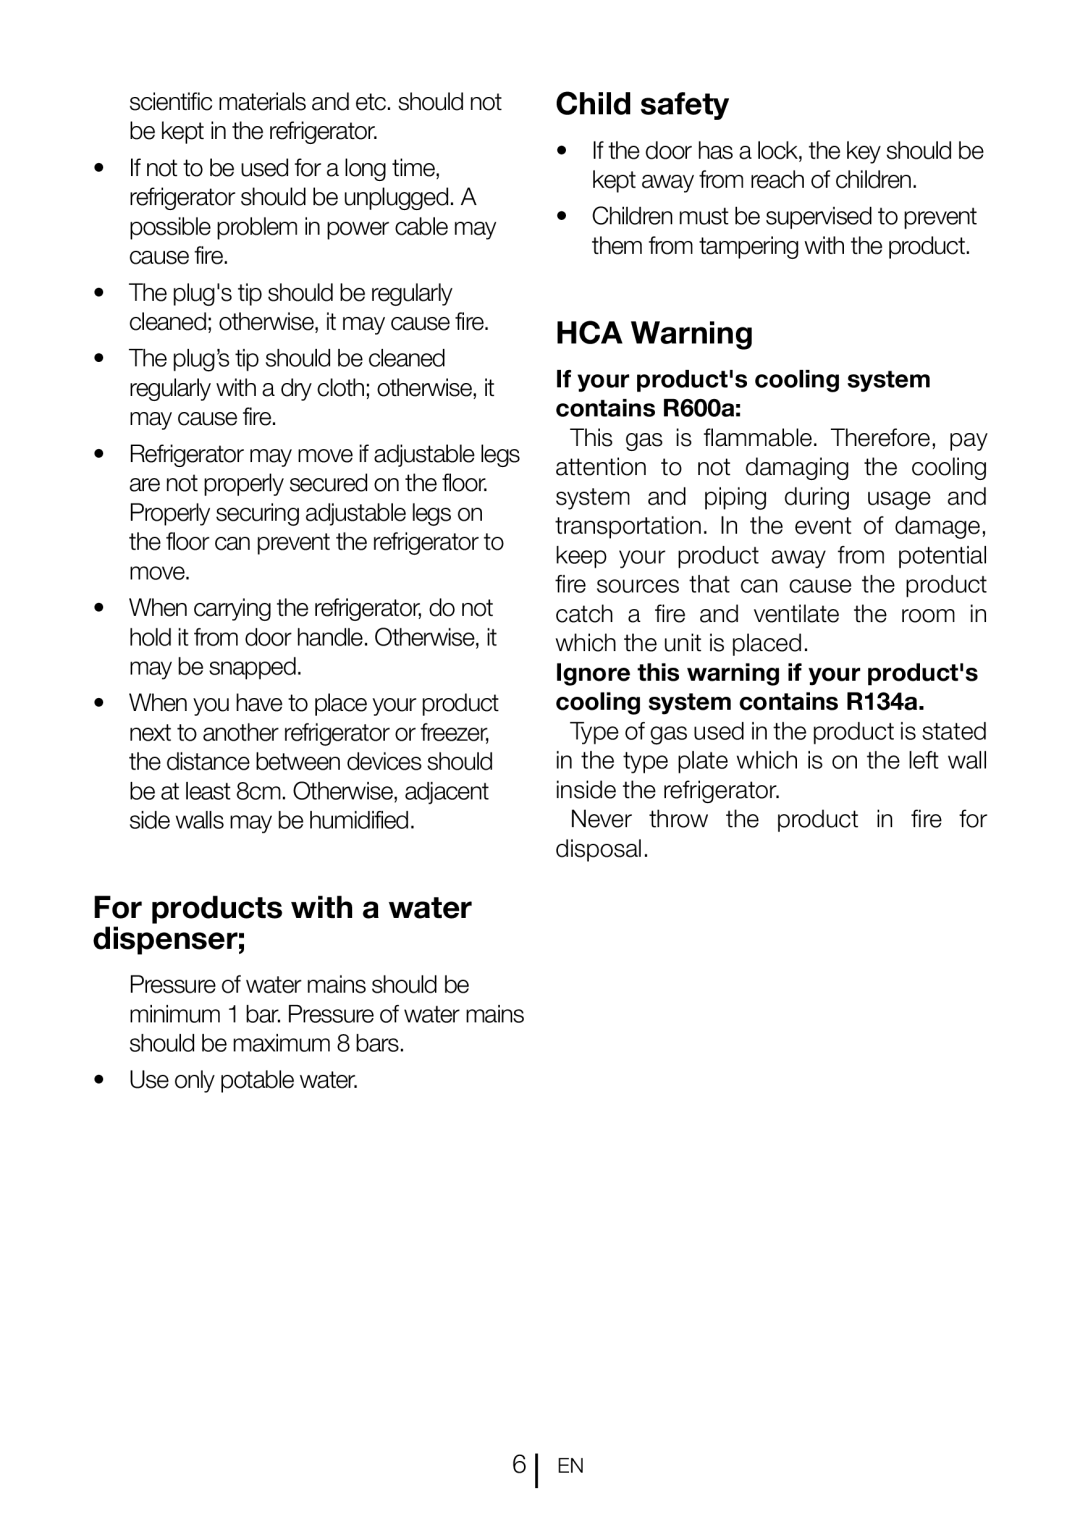 Beko CN 151120 X manual For products with a water dispenser, Child safety, HCA Warning 